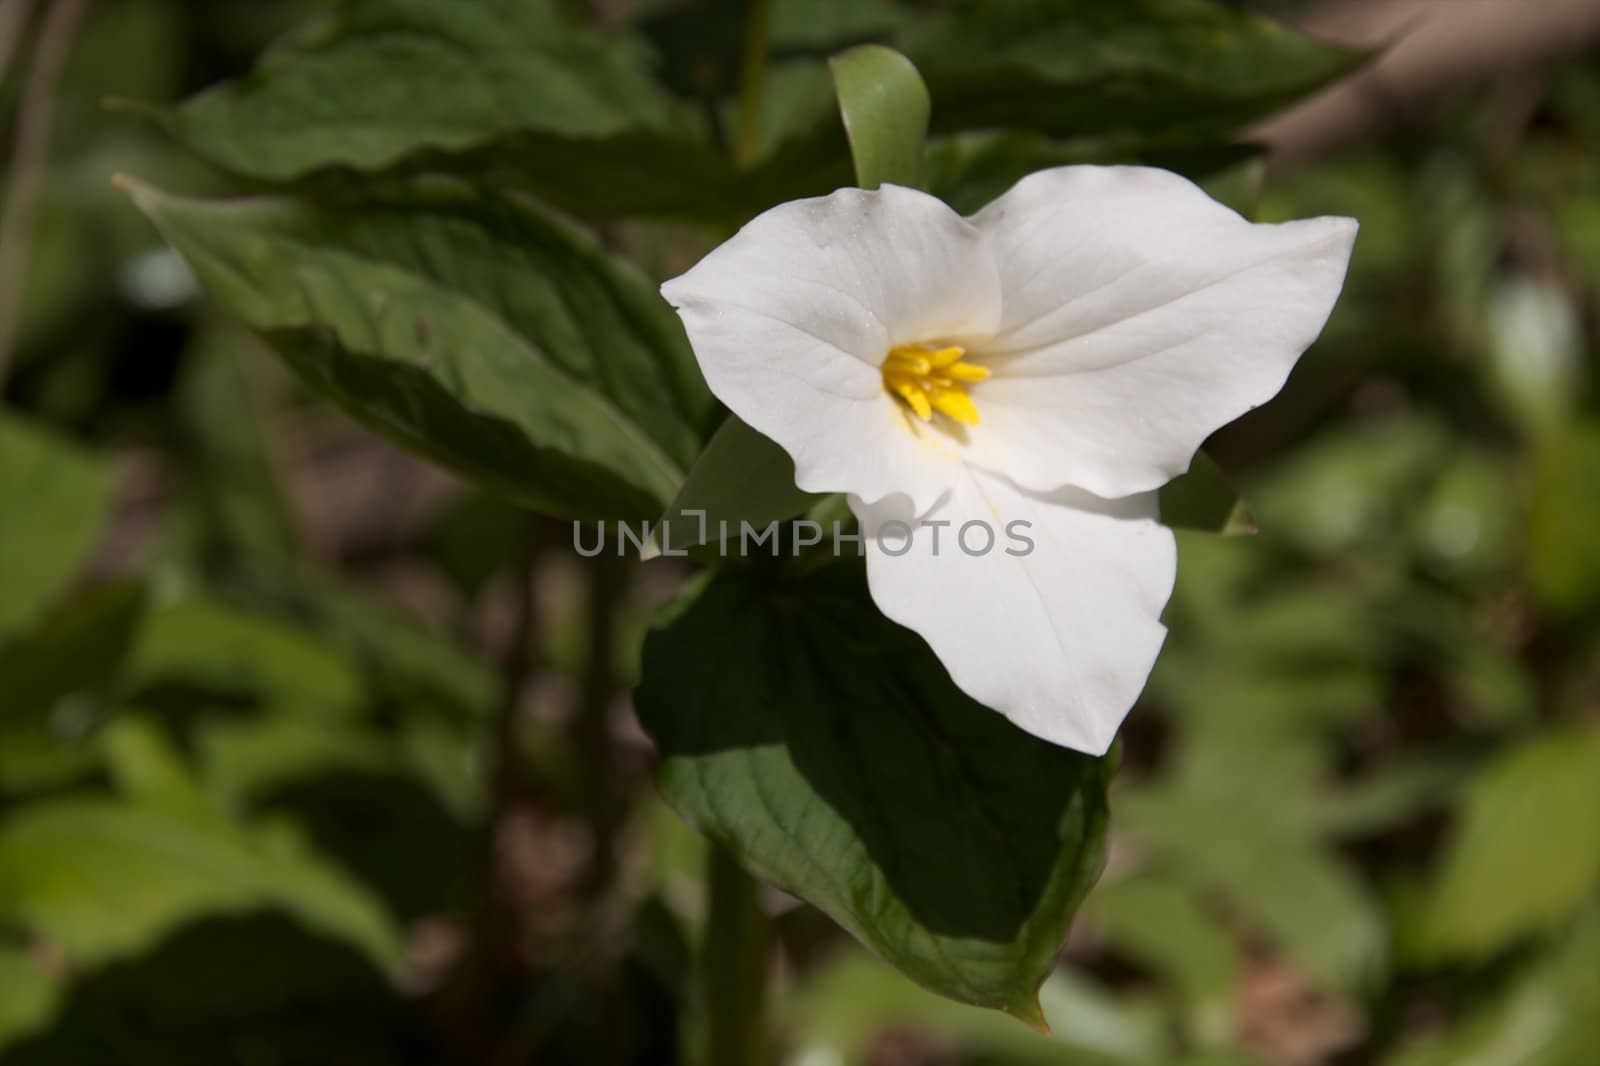 A trillium in bloom in spring time.